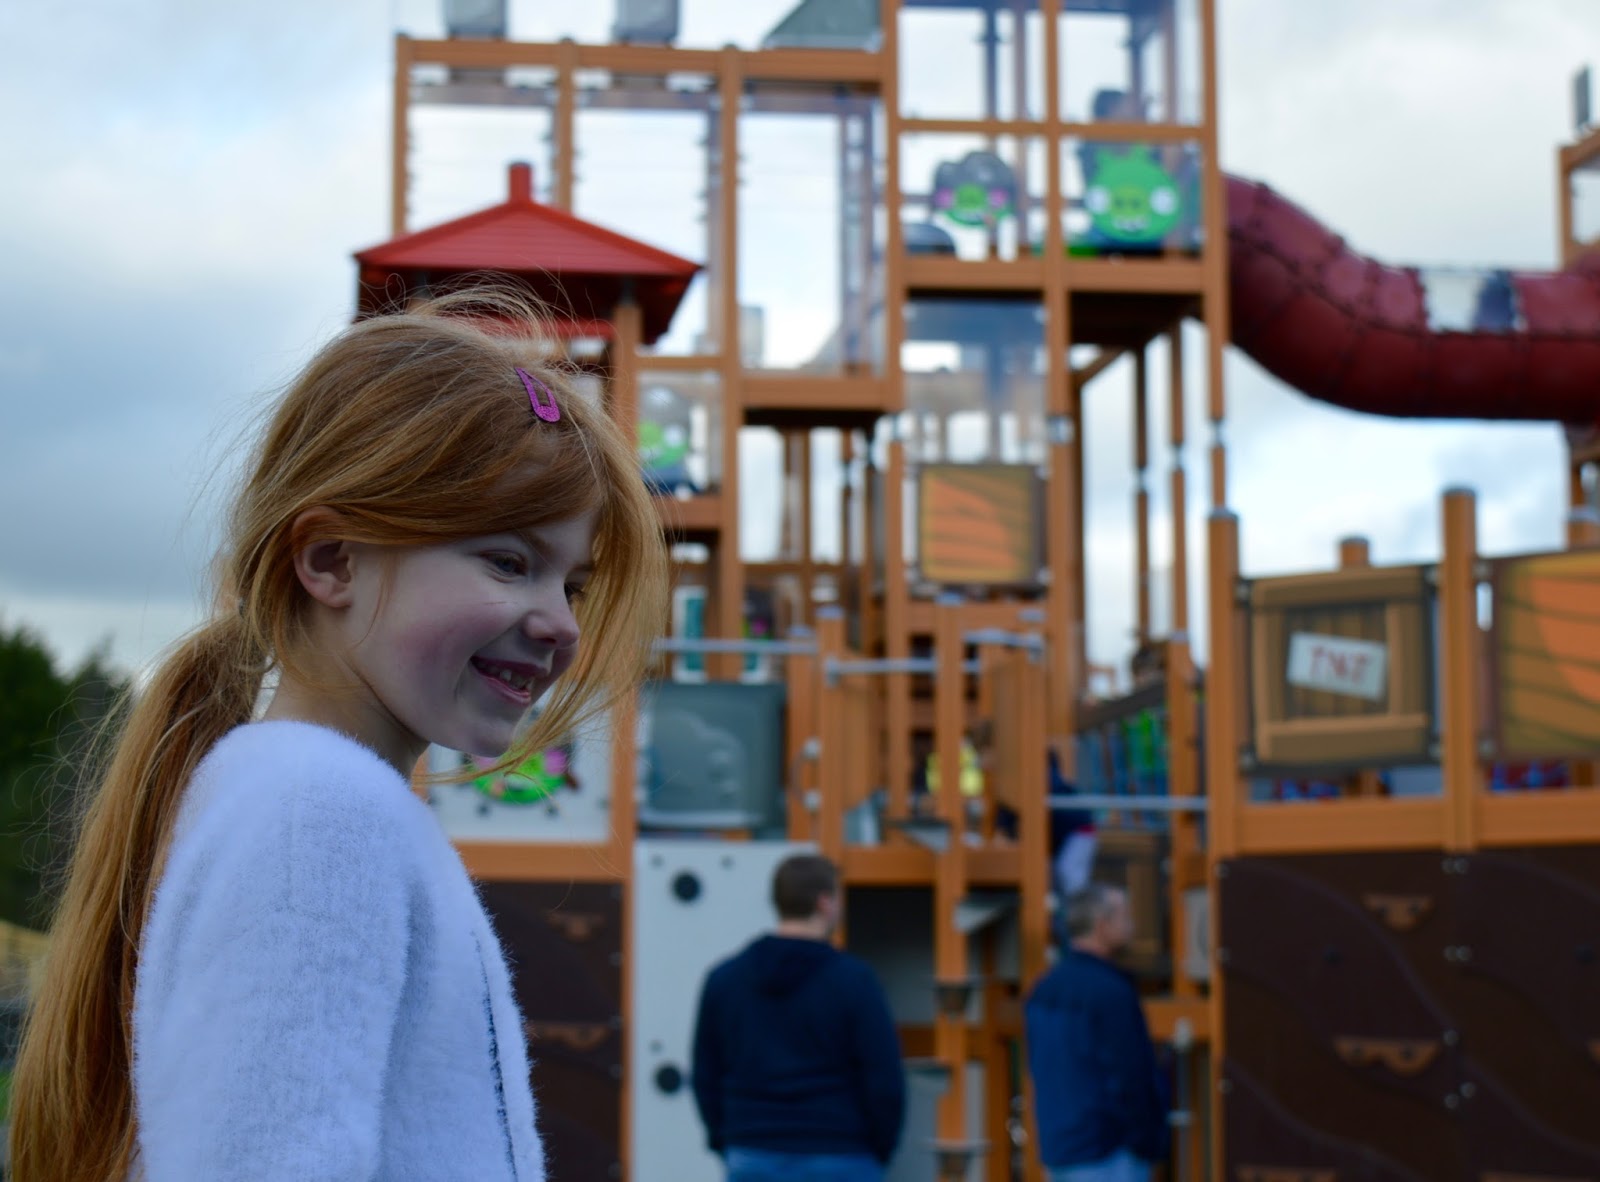 Visiting Angry Birds Activity Park at Lightwater Valley, North Yorkshire